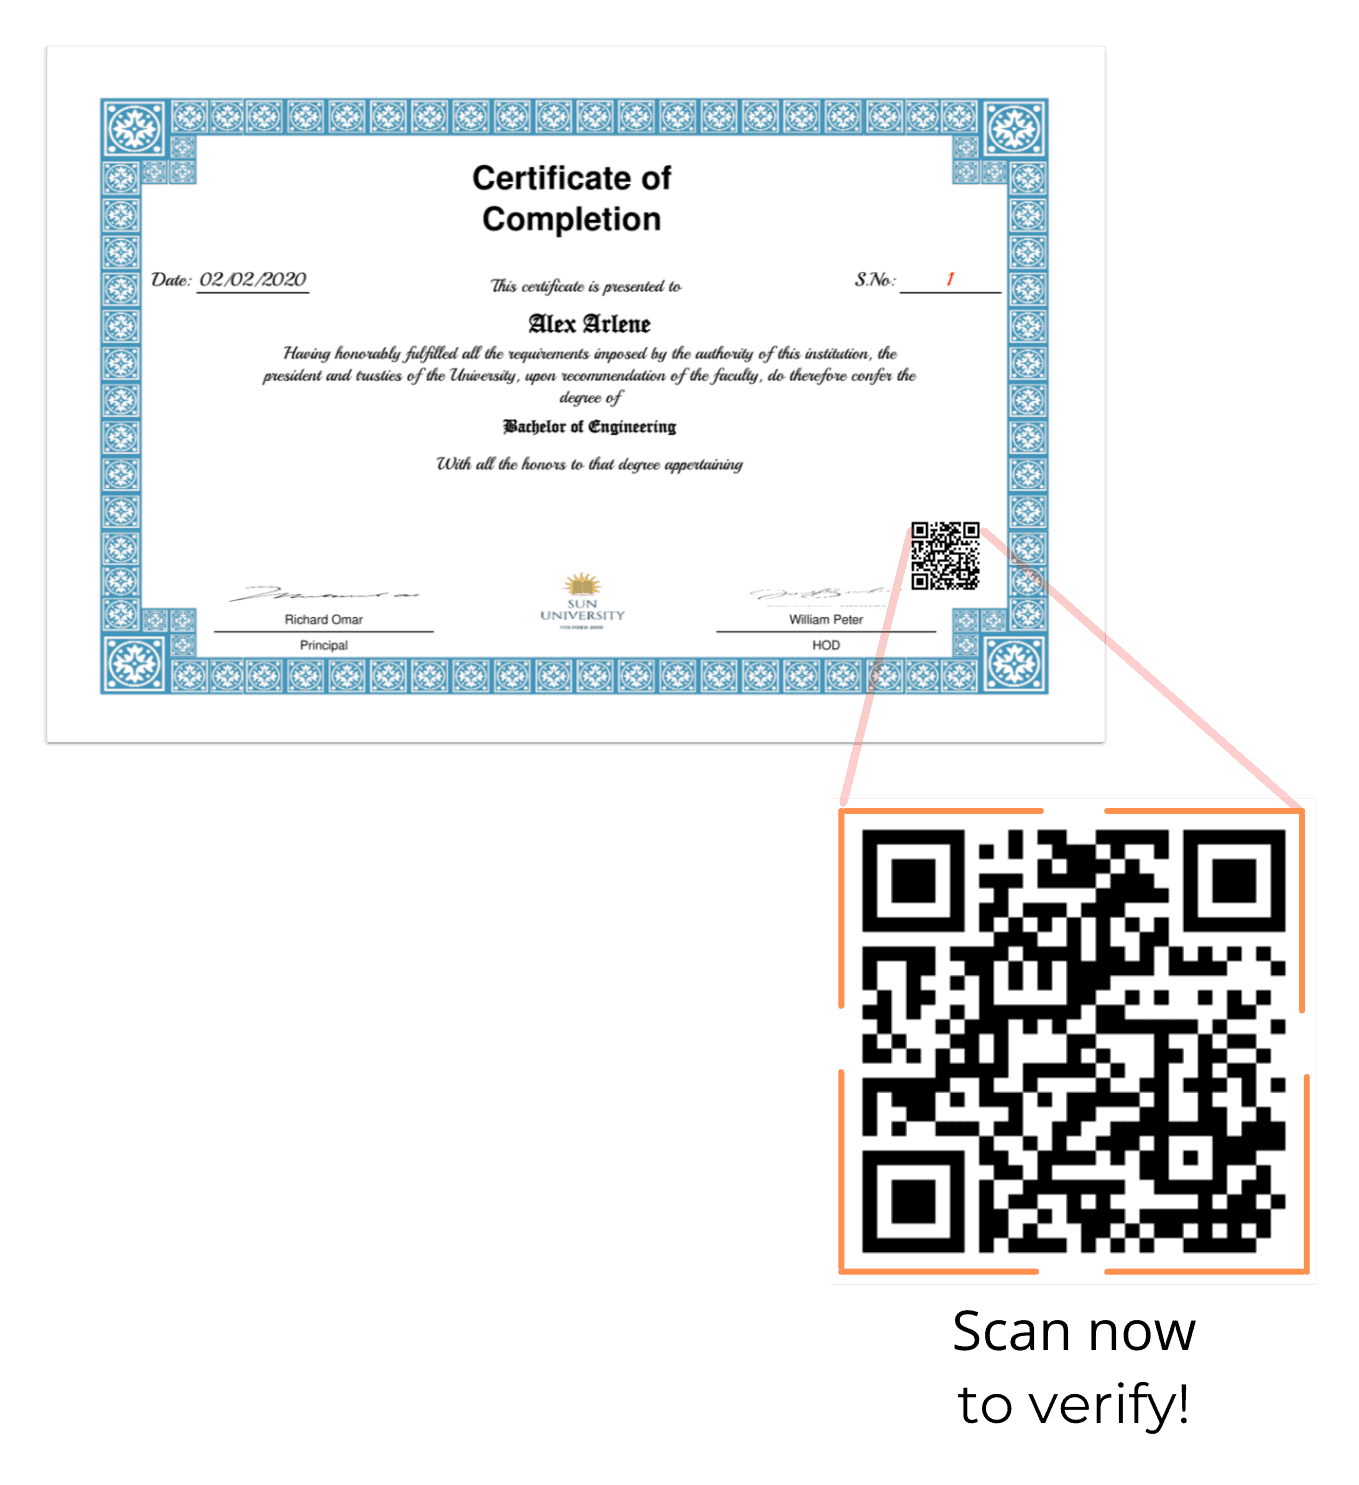 try the QR code verification solution